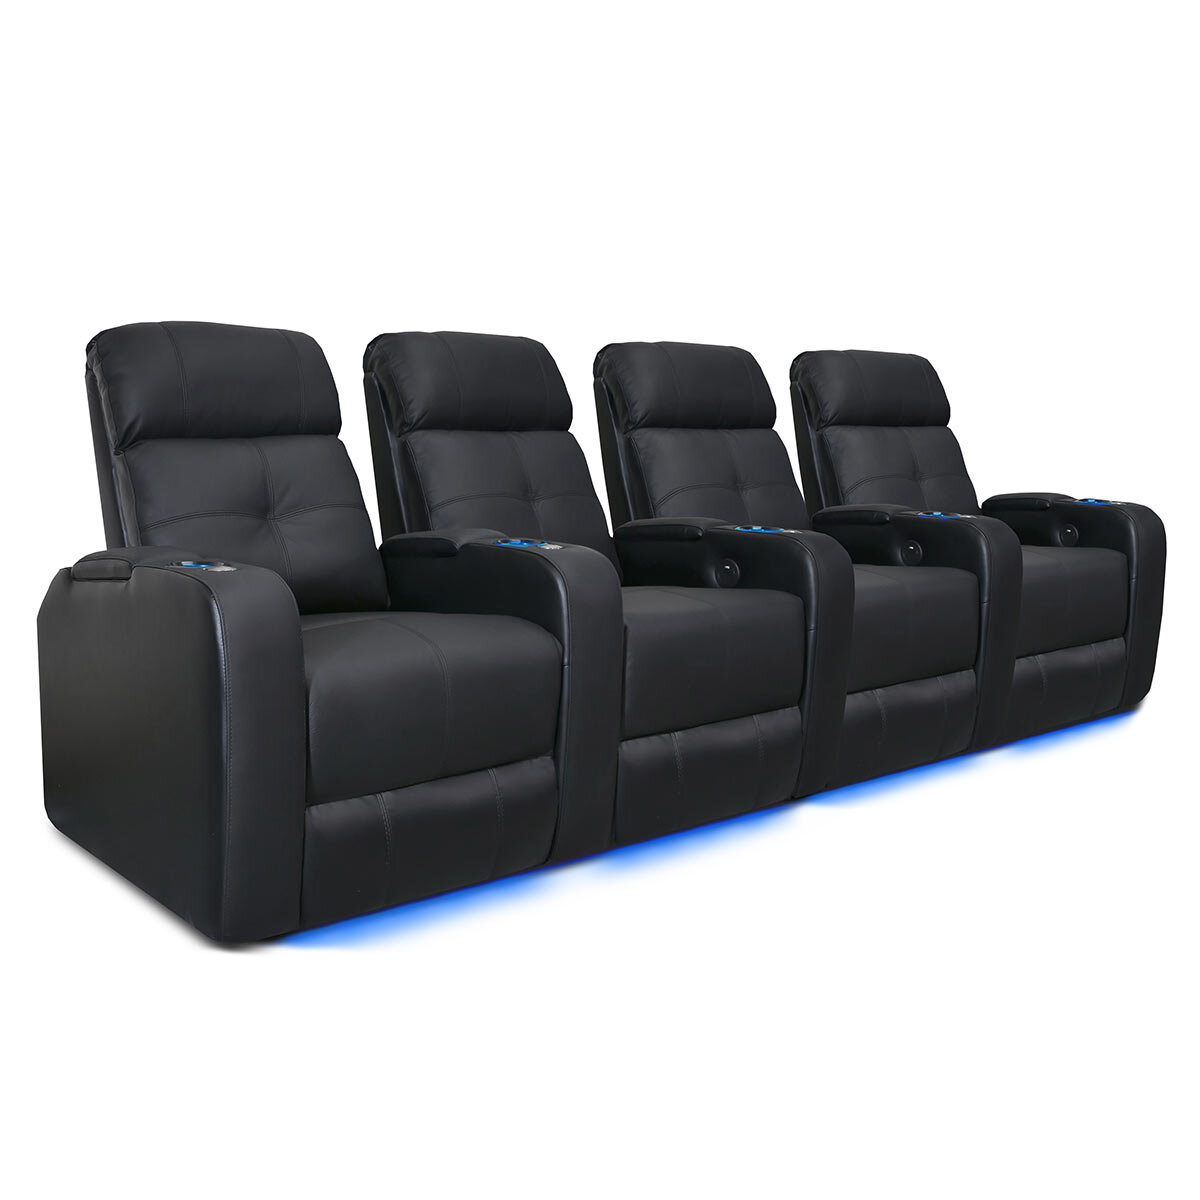 Valencia Home Theatre Seating Verona Row of 4 Chairs, Black